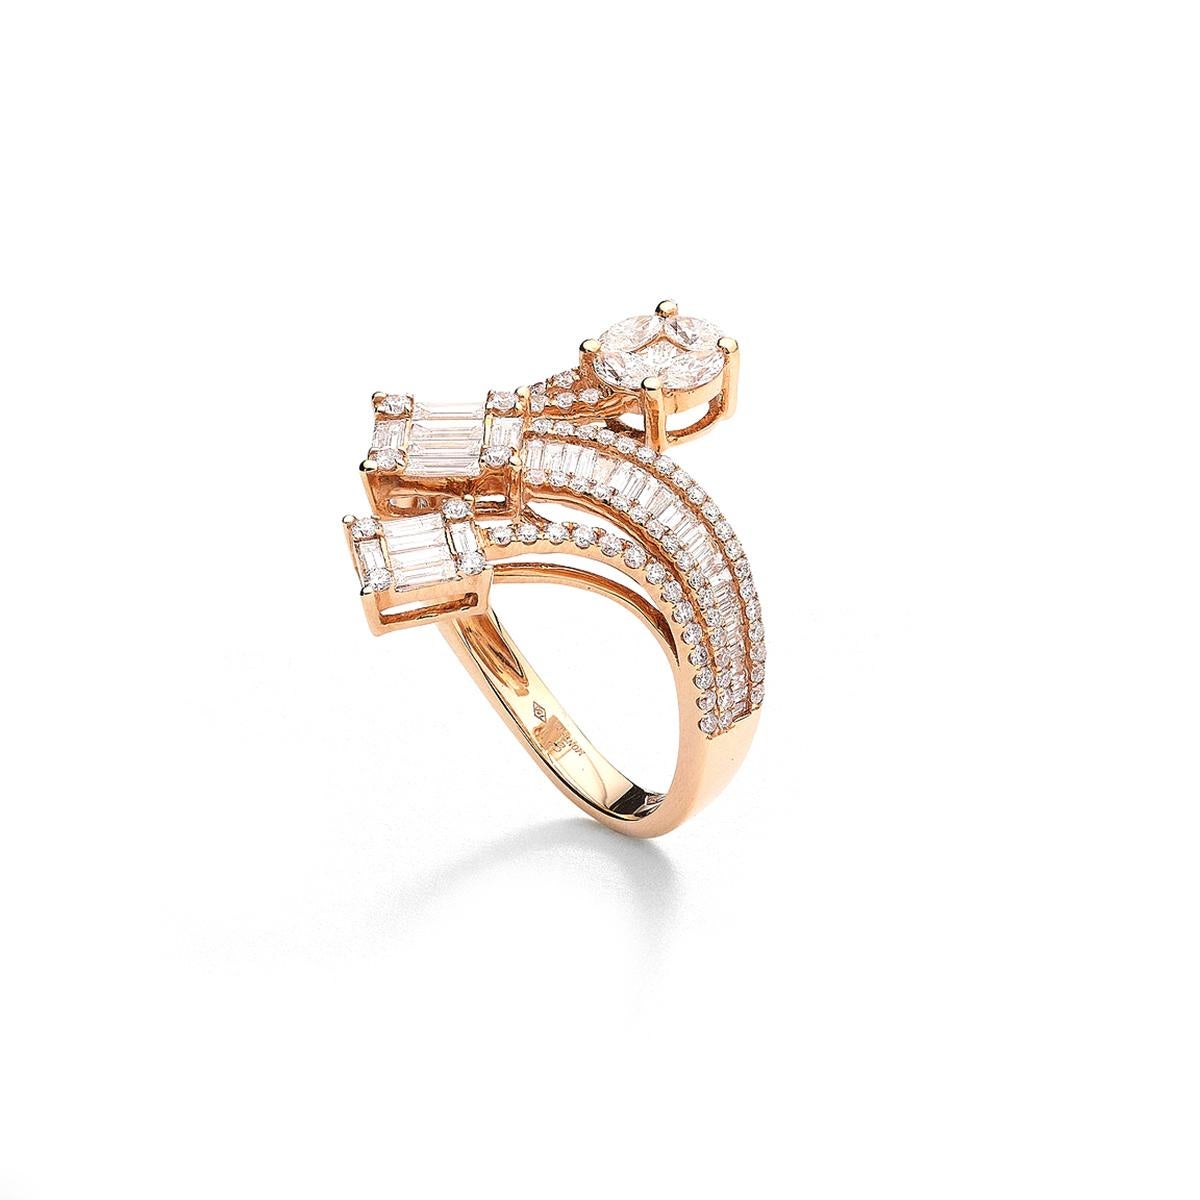 Ring in 18kt pink gold set with 41 baguette, princess and marquise cut diamonds 1.22 cts and 89 diamonds 0.57 cts Size 54